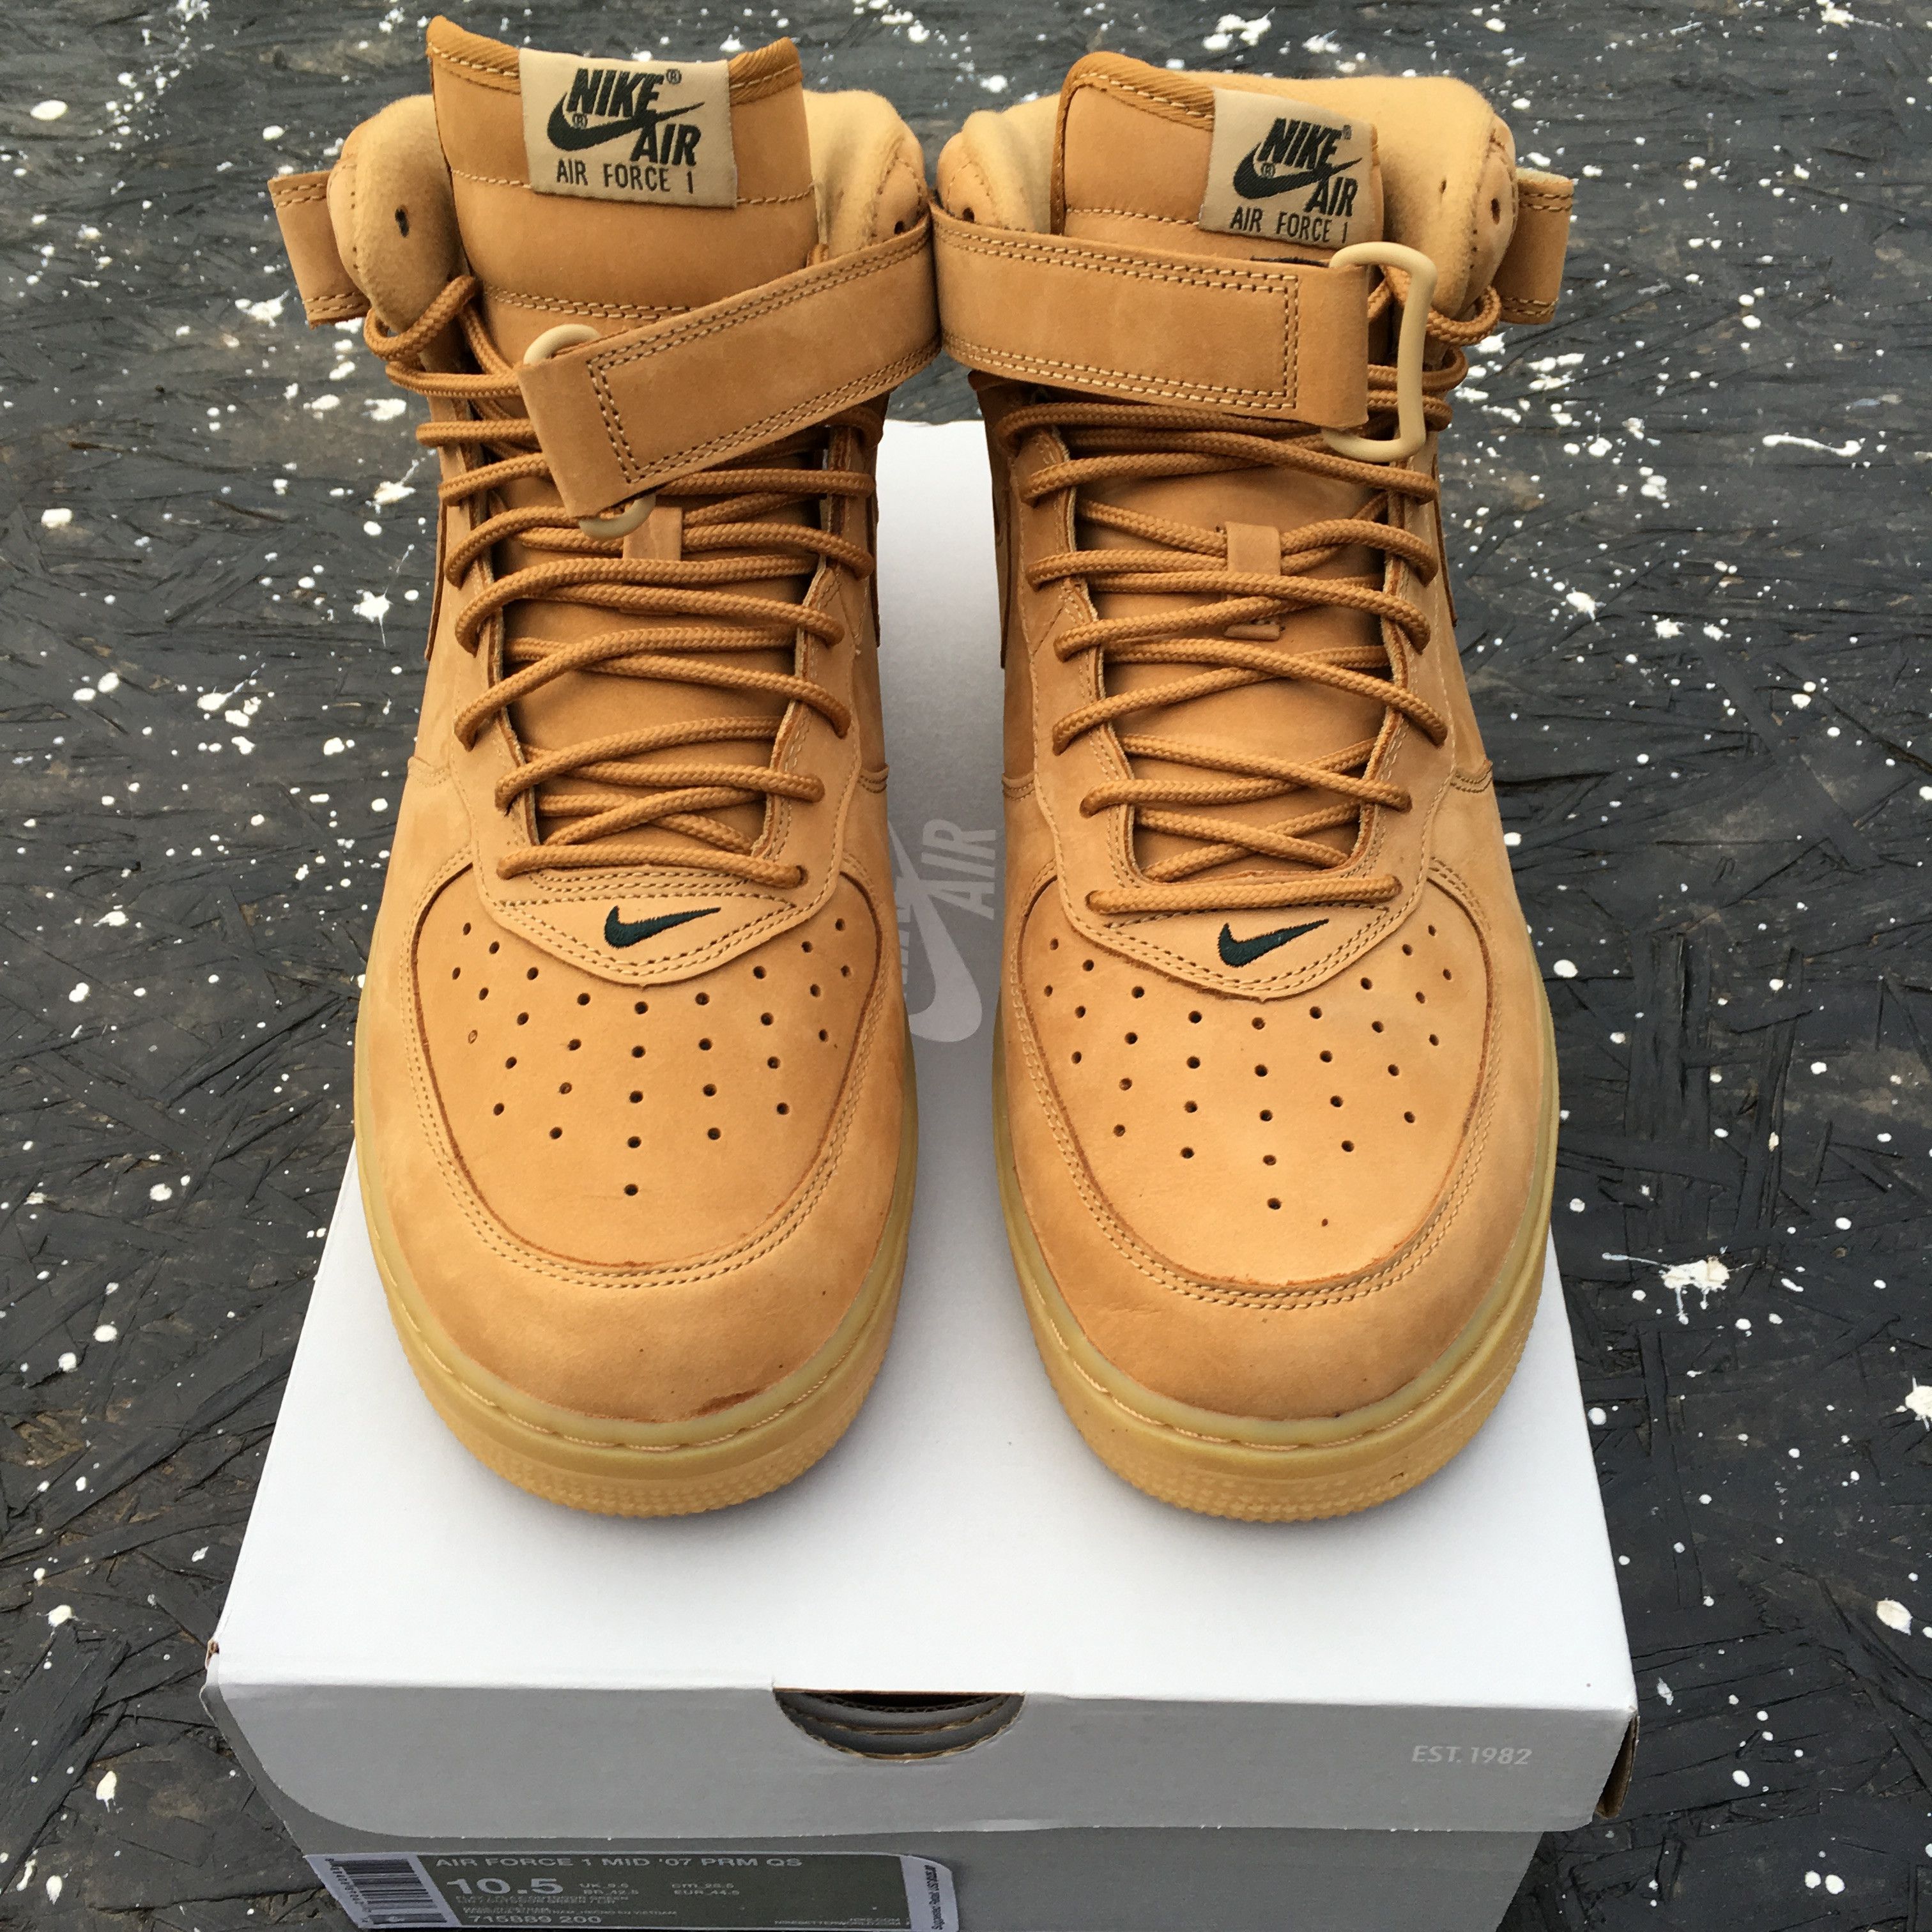 Nike Air Force 1 Mid Flax "Wheat" Size US 10.5 / EU 43-44 - 2 Preview